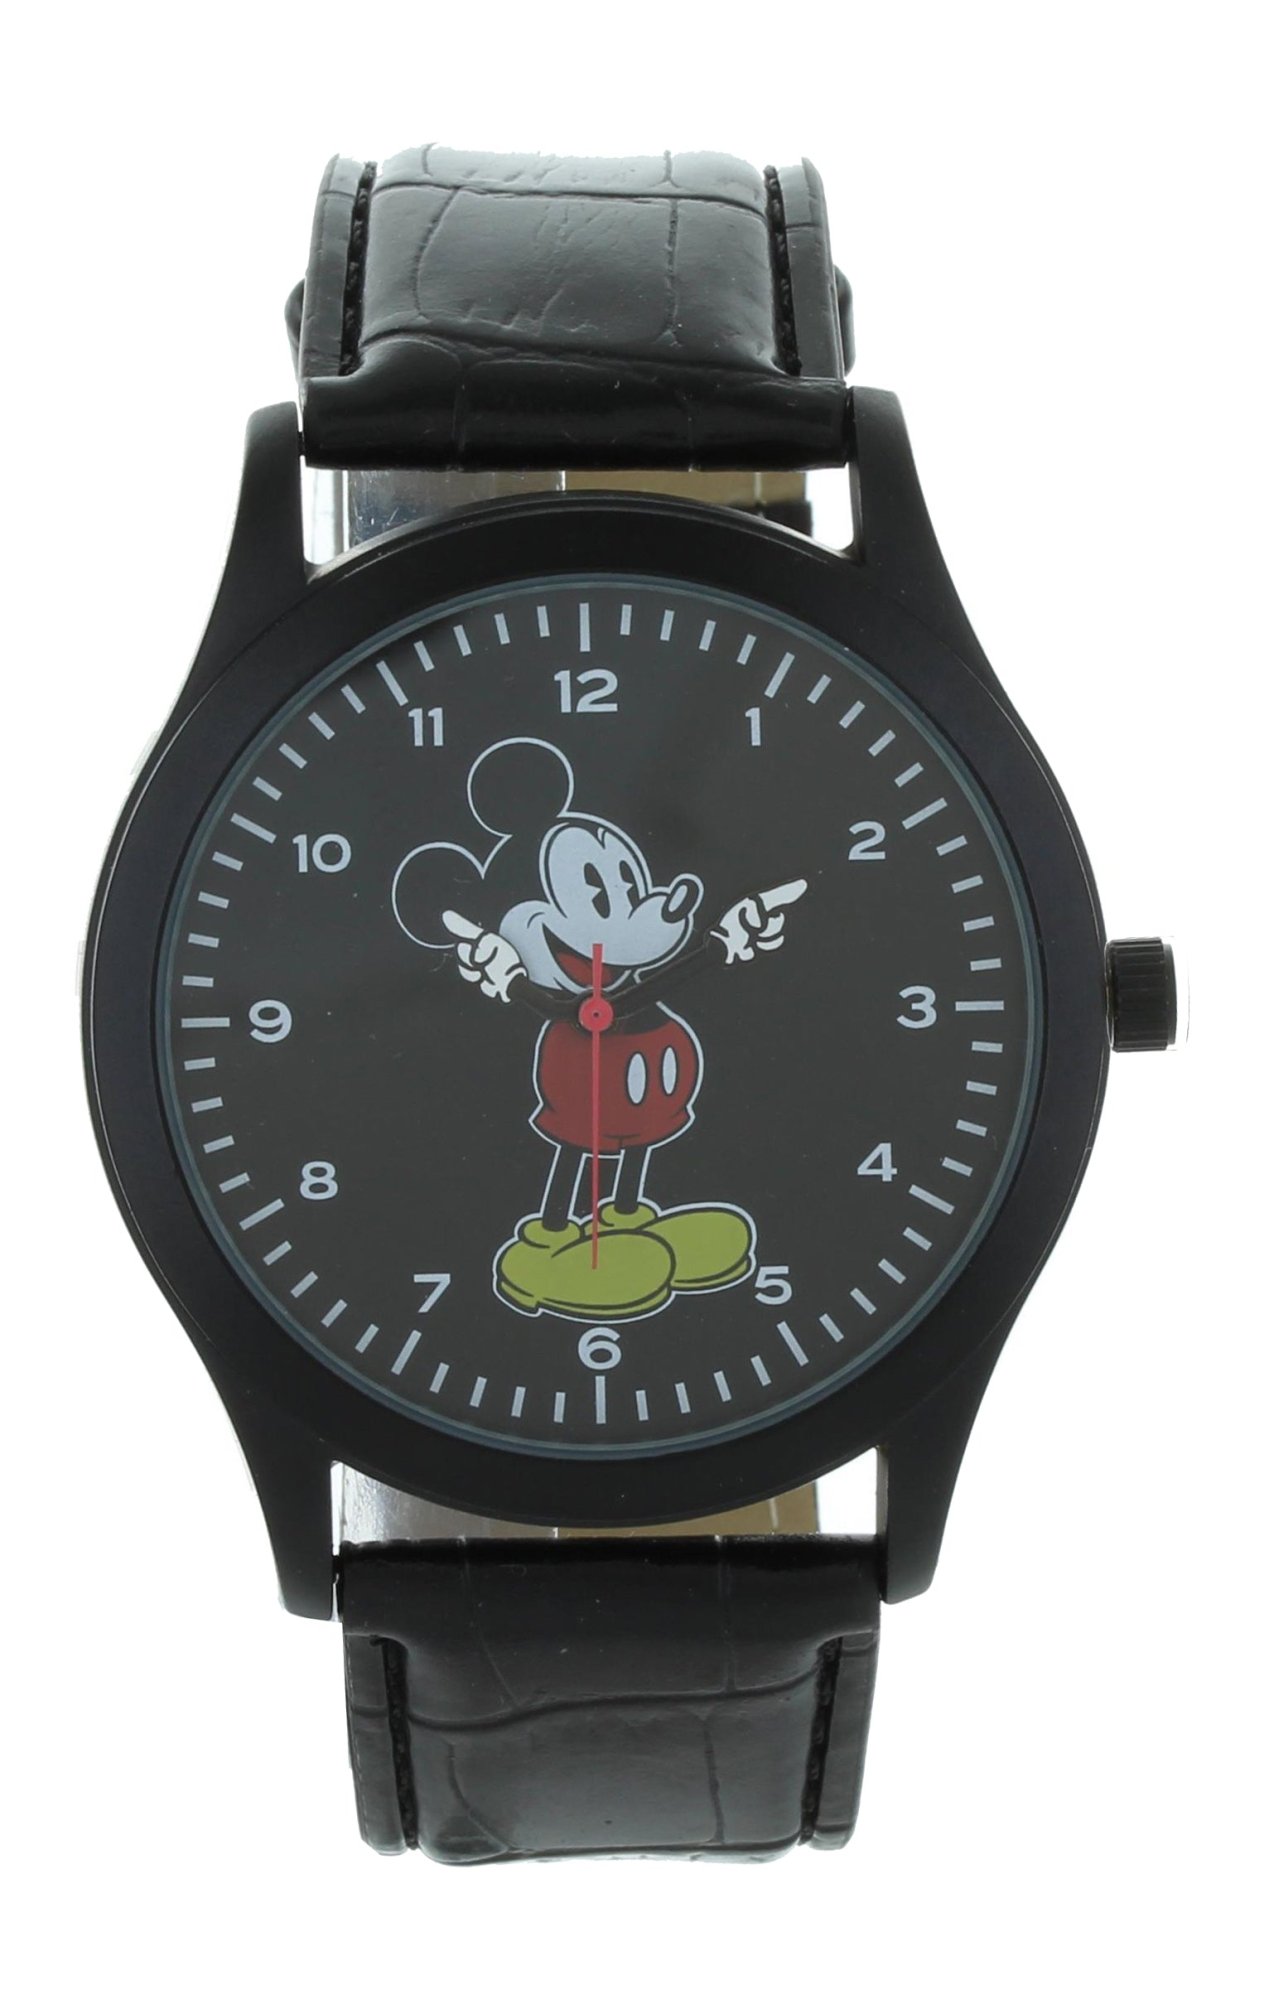 Model: Unisex Disney Mickey Mouse Classic Watch in All Black Design